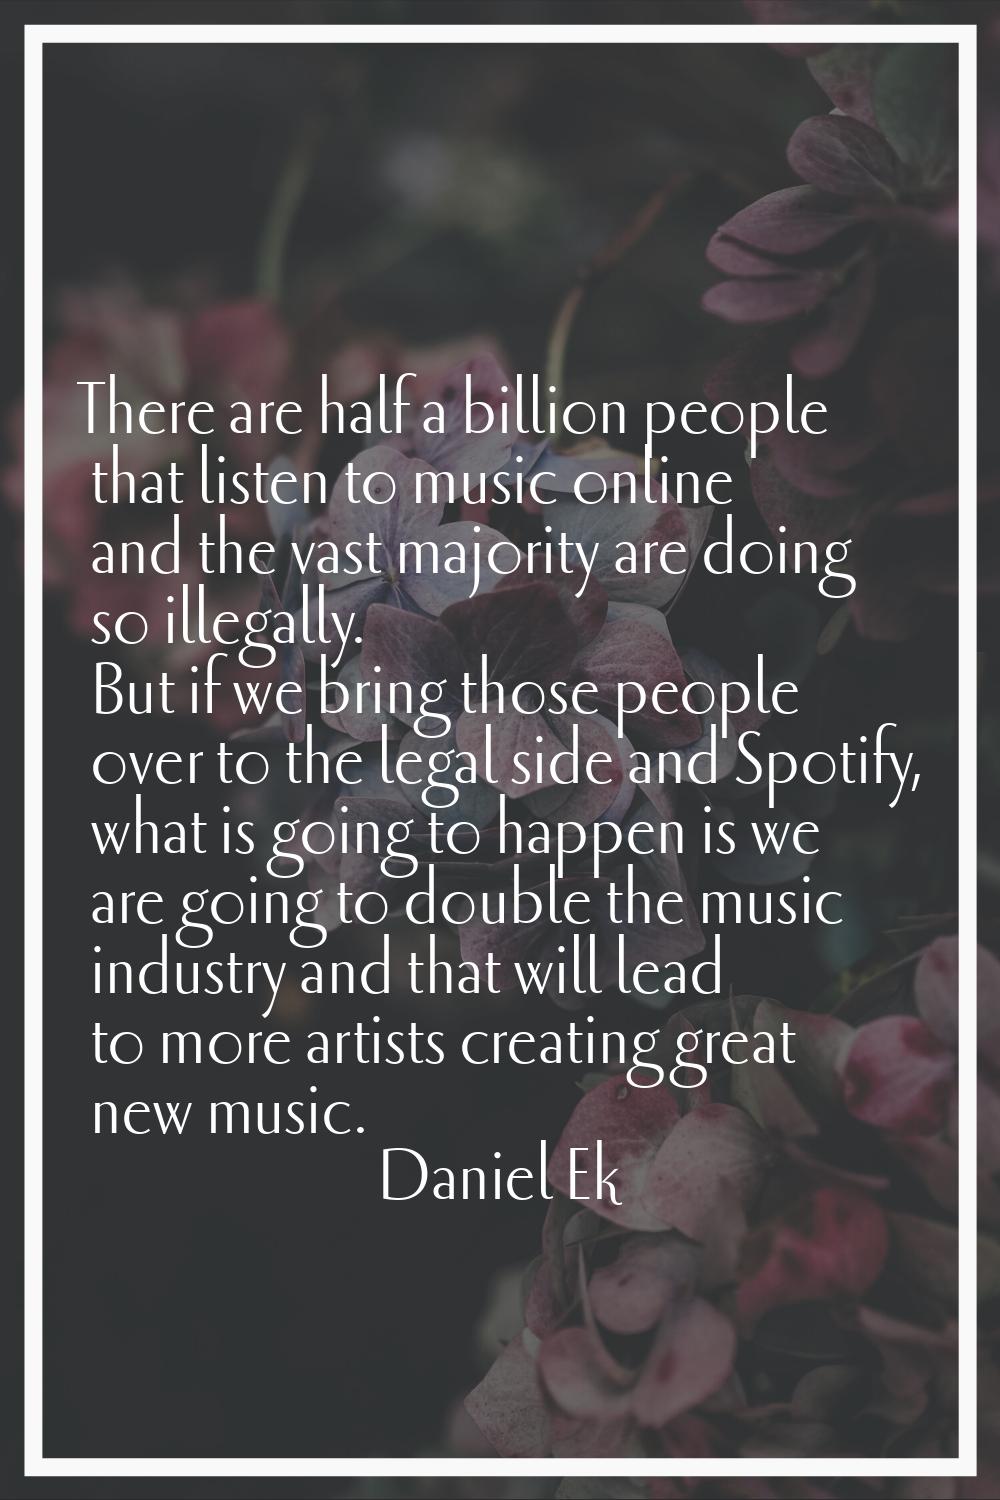 There are half a billion people that listen to music online and the vast majority are doing so ille